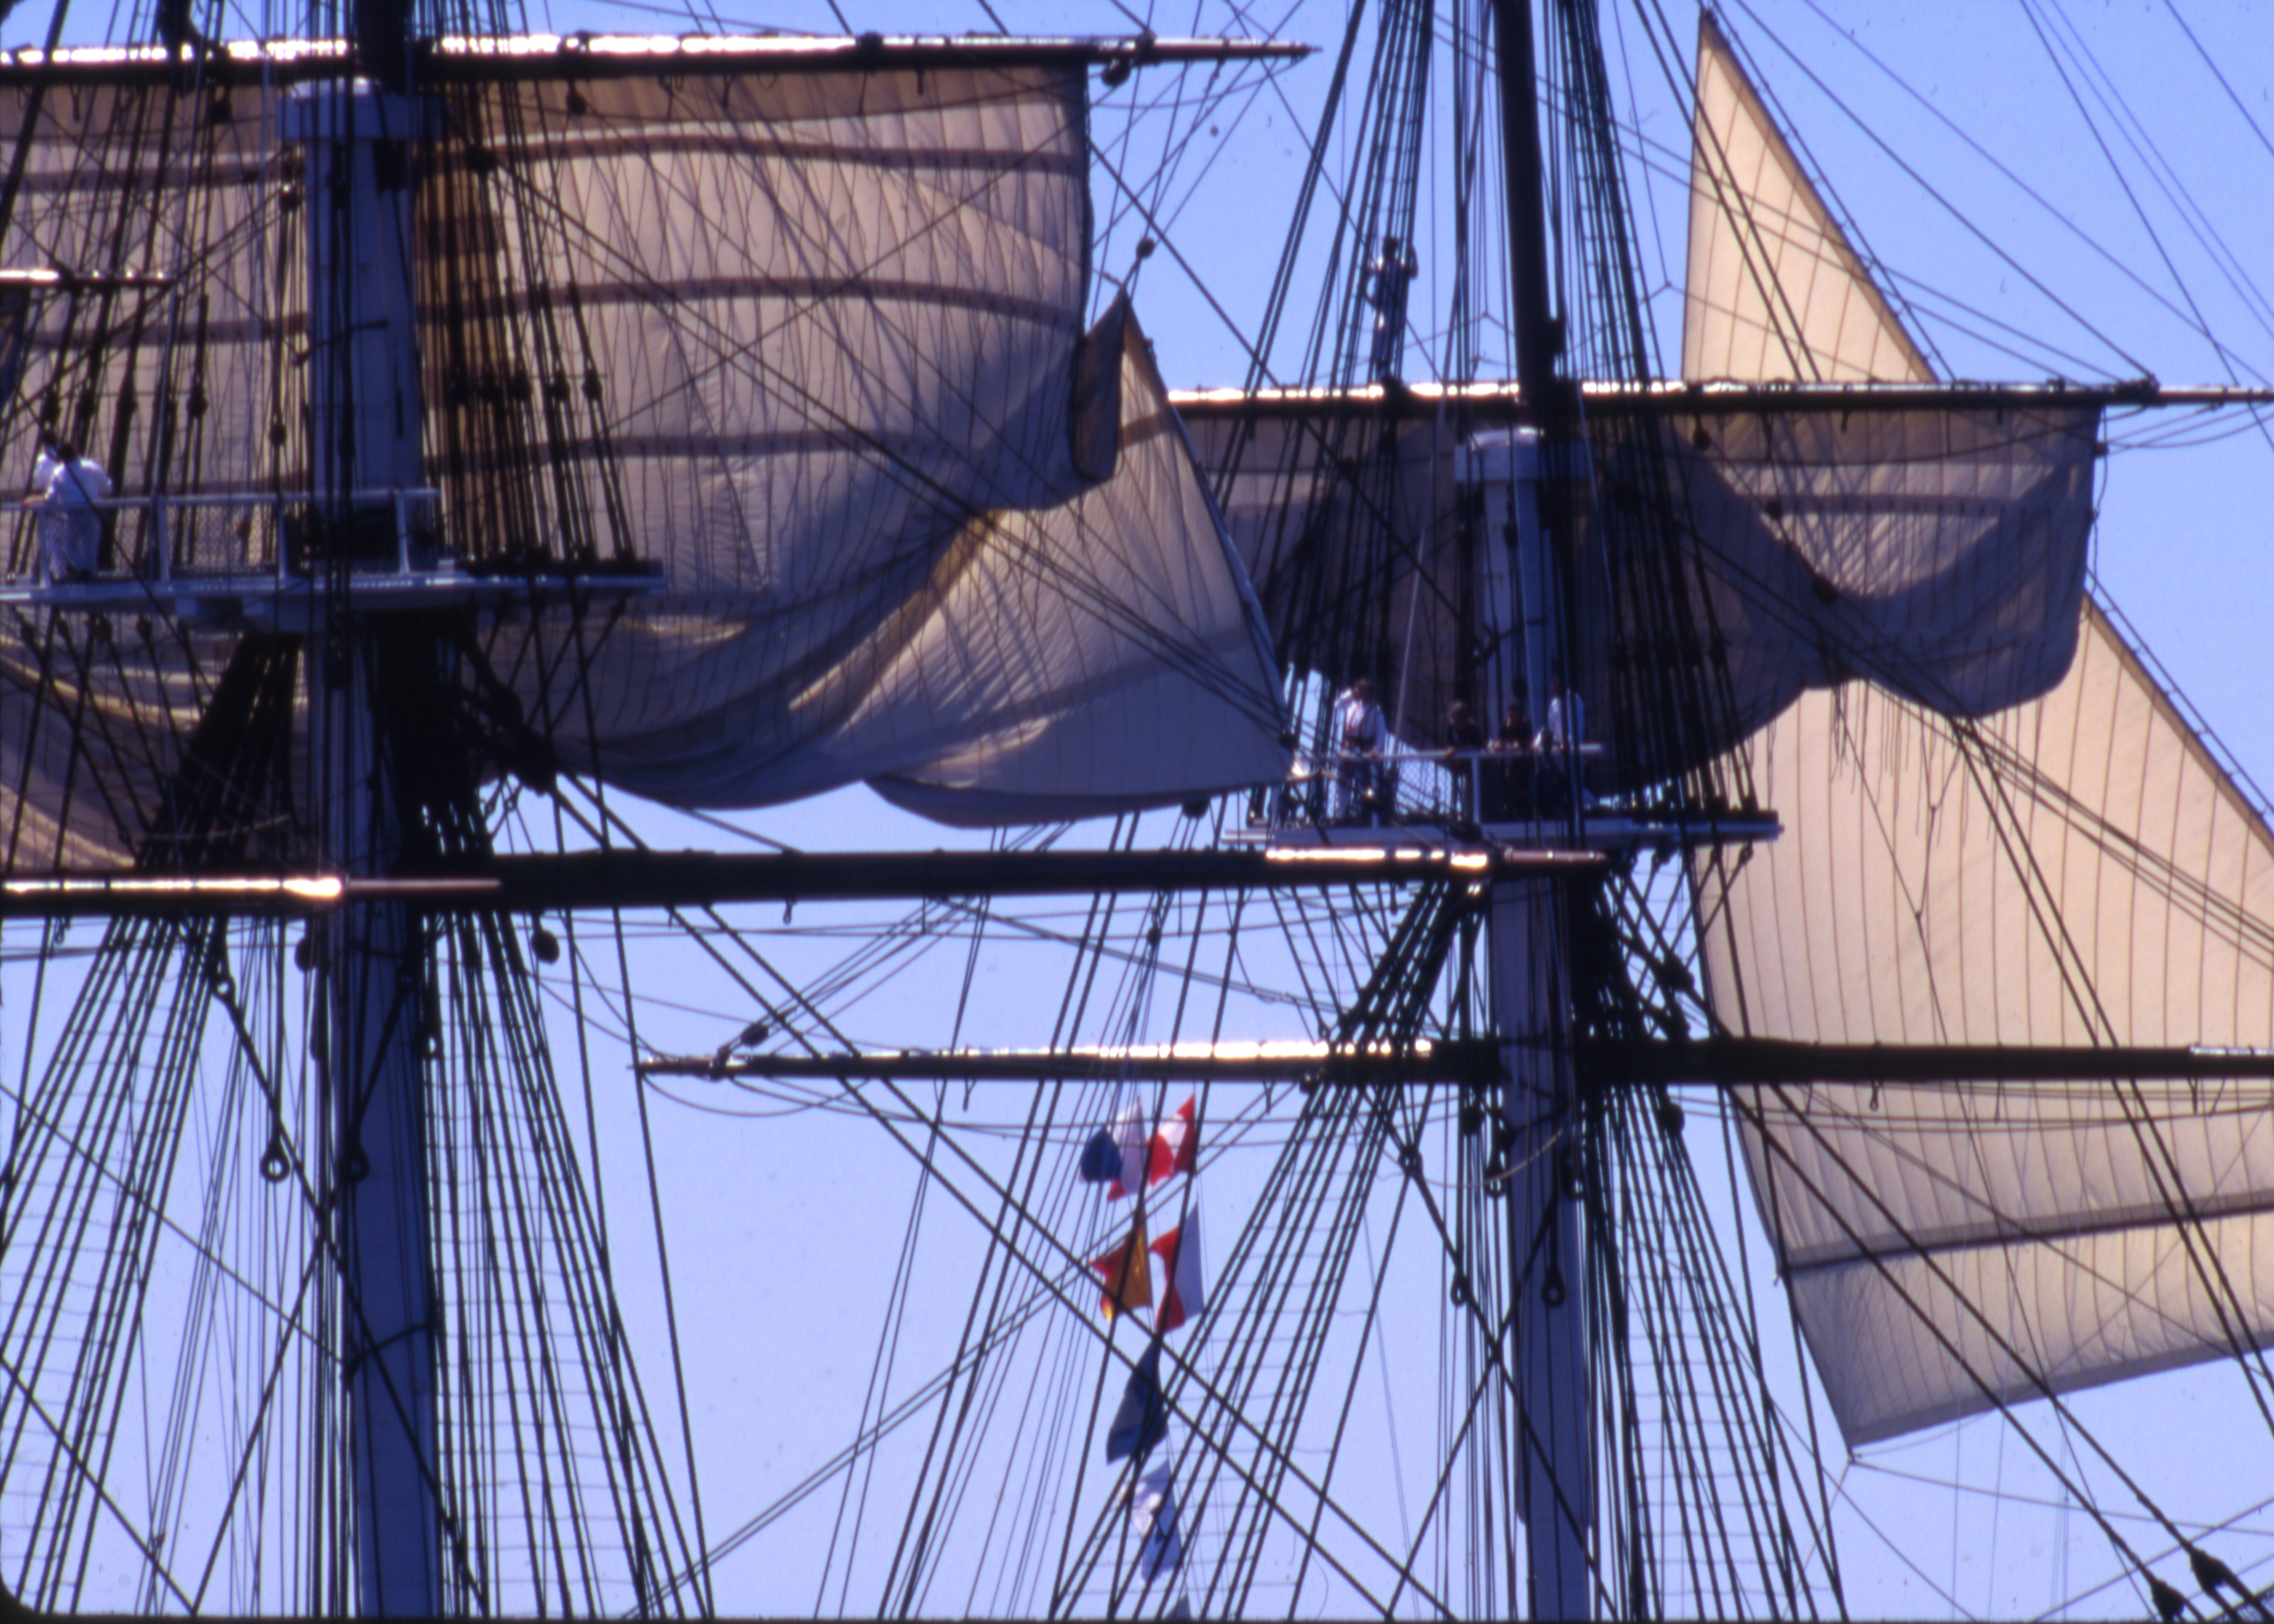 How to Sail a Big Ship - USS Constitution Museum